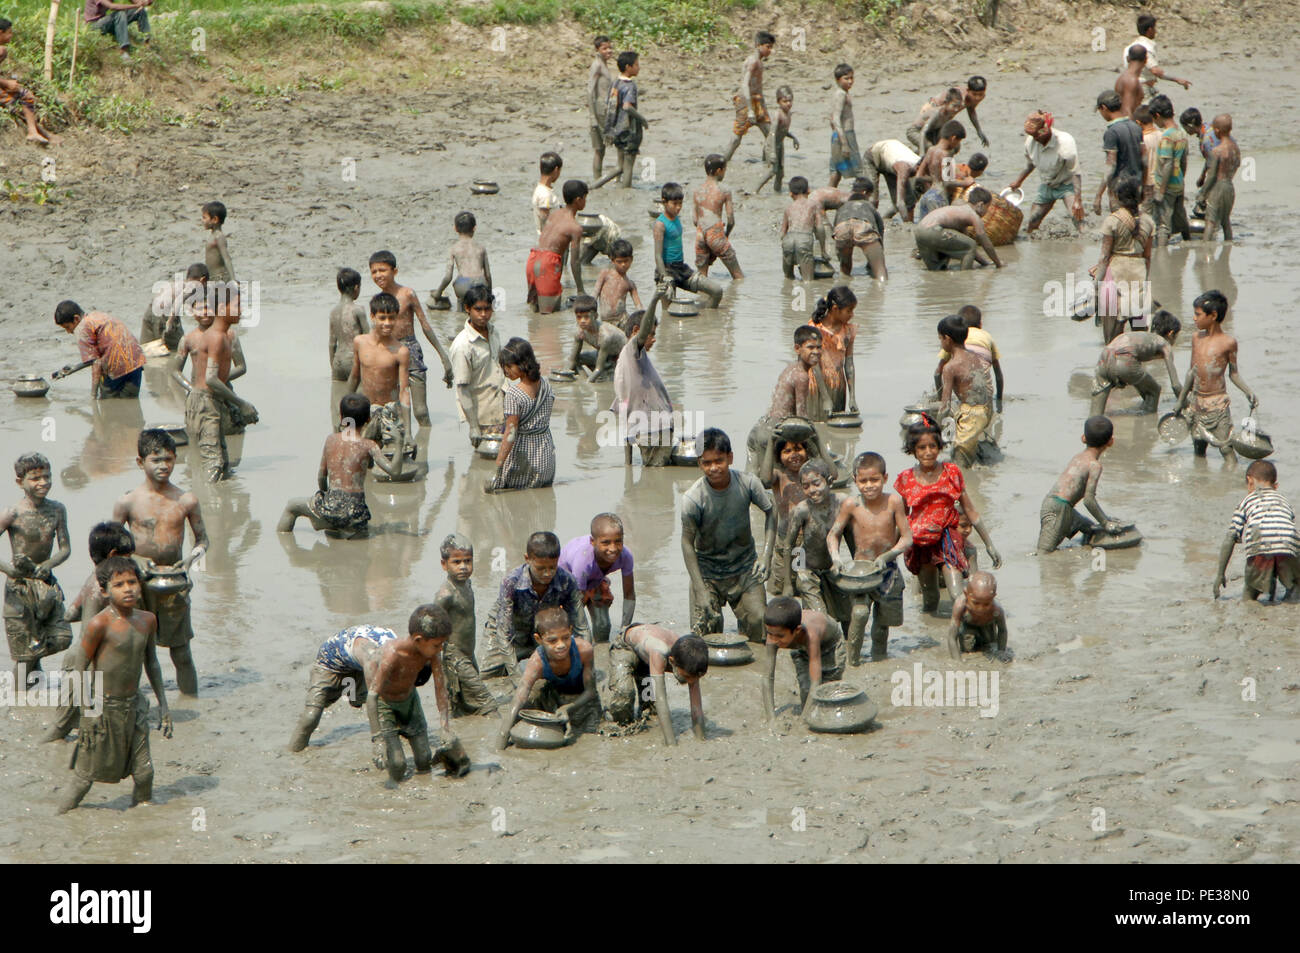 Gopalganj, Bangladesh -March 26, 2009: Fishing in the drying up rivers, canals and water bodies during the winter season is a common feature in Bangla Stock Photo